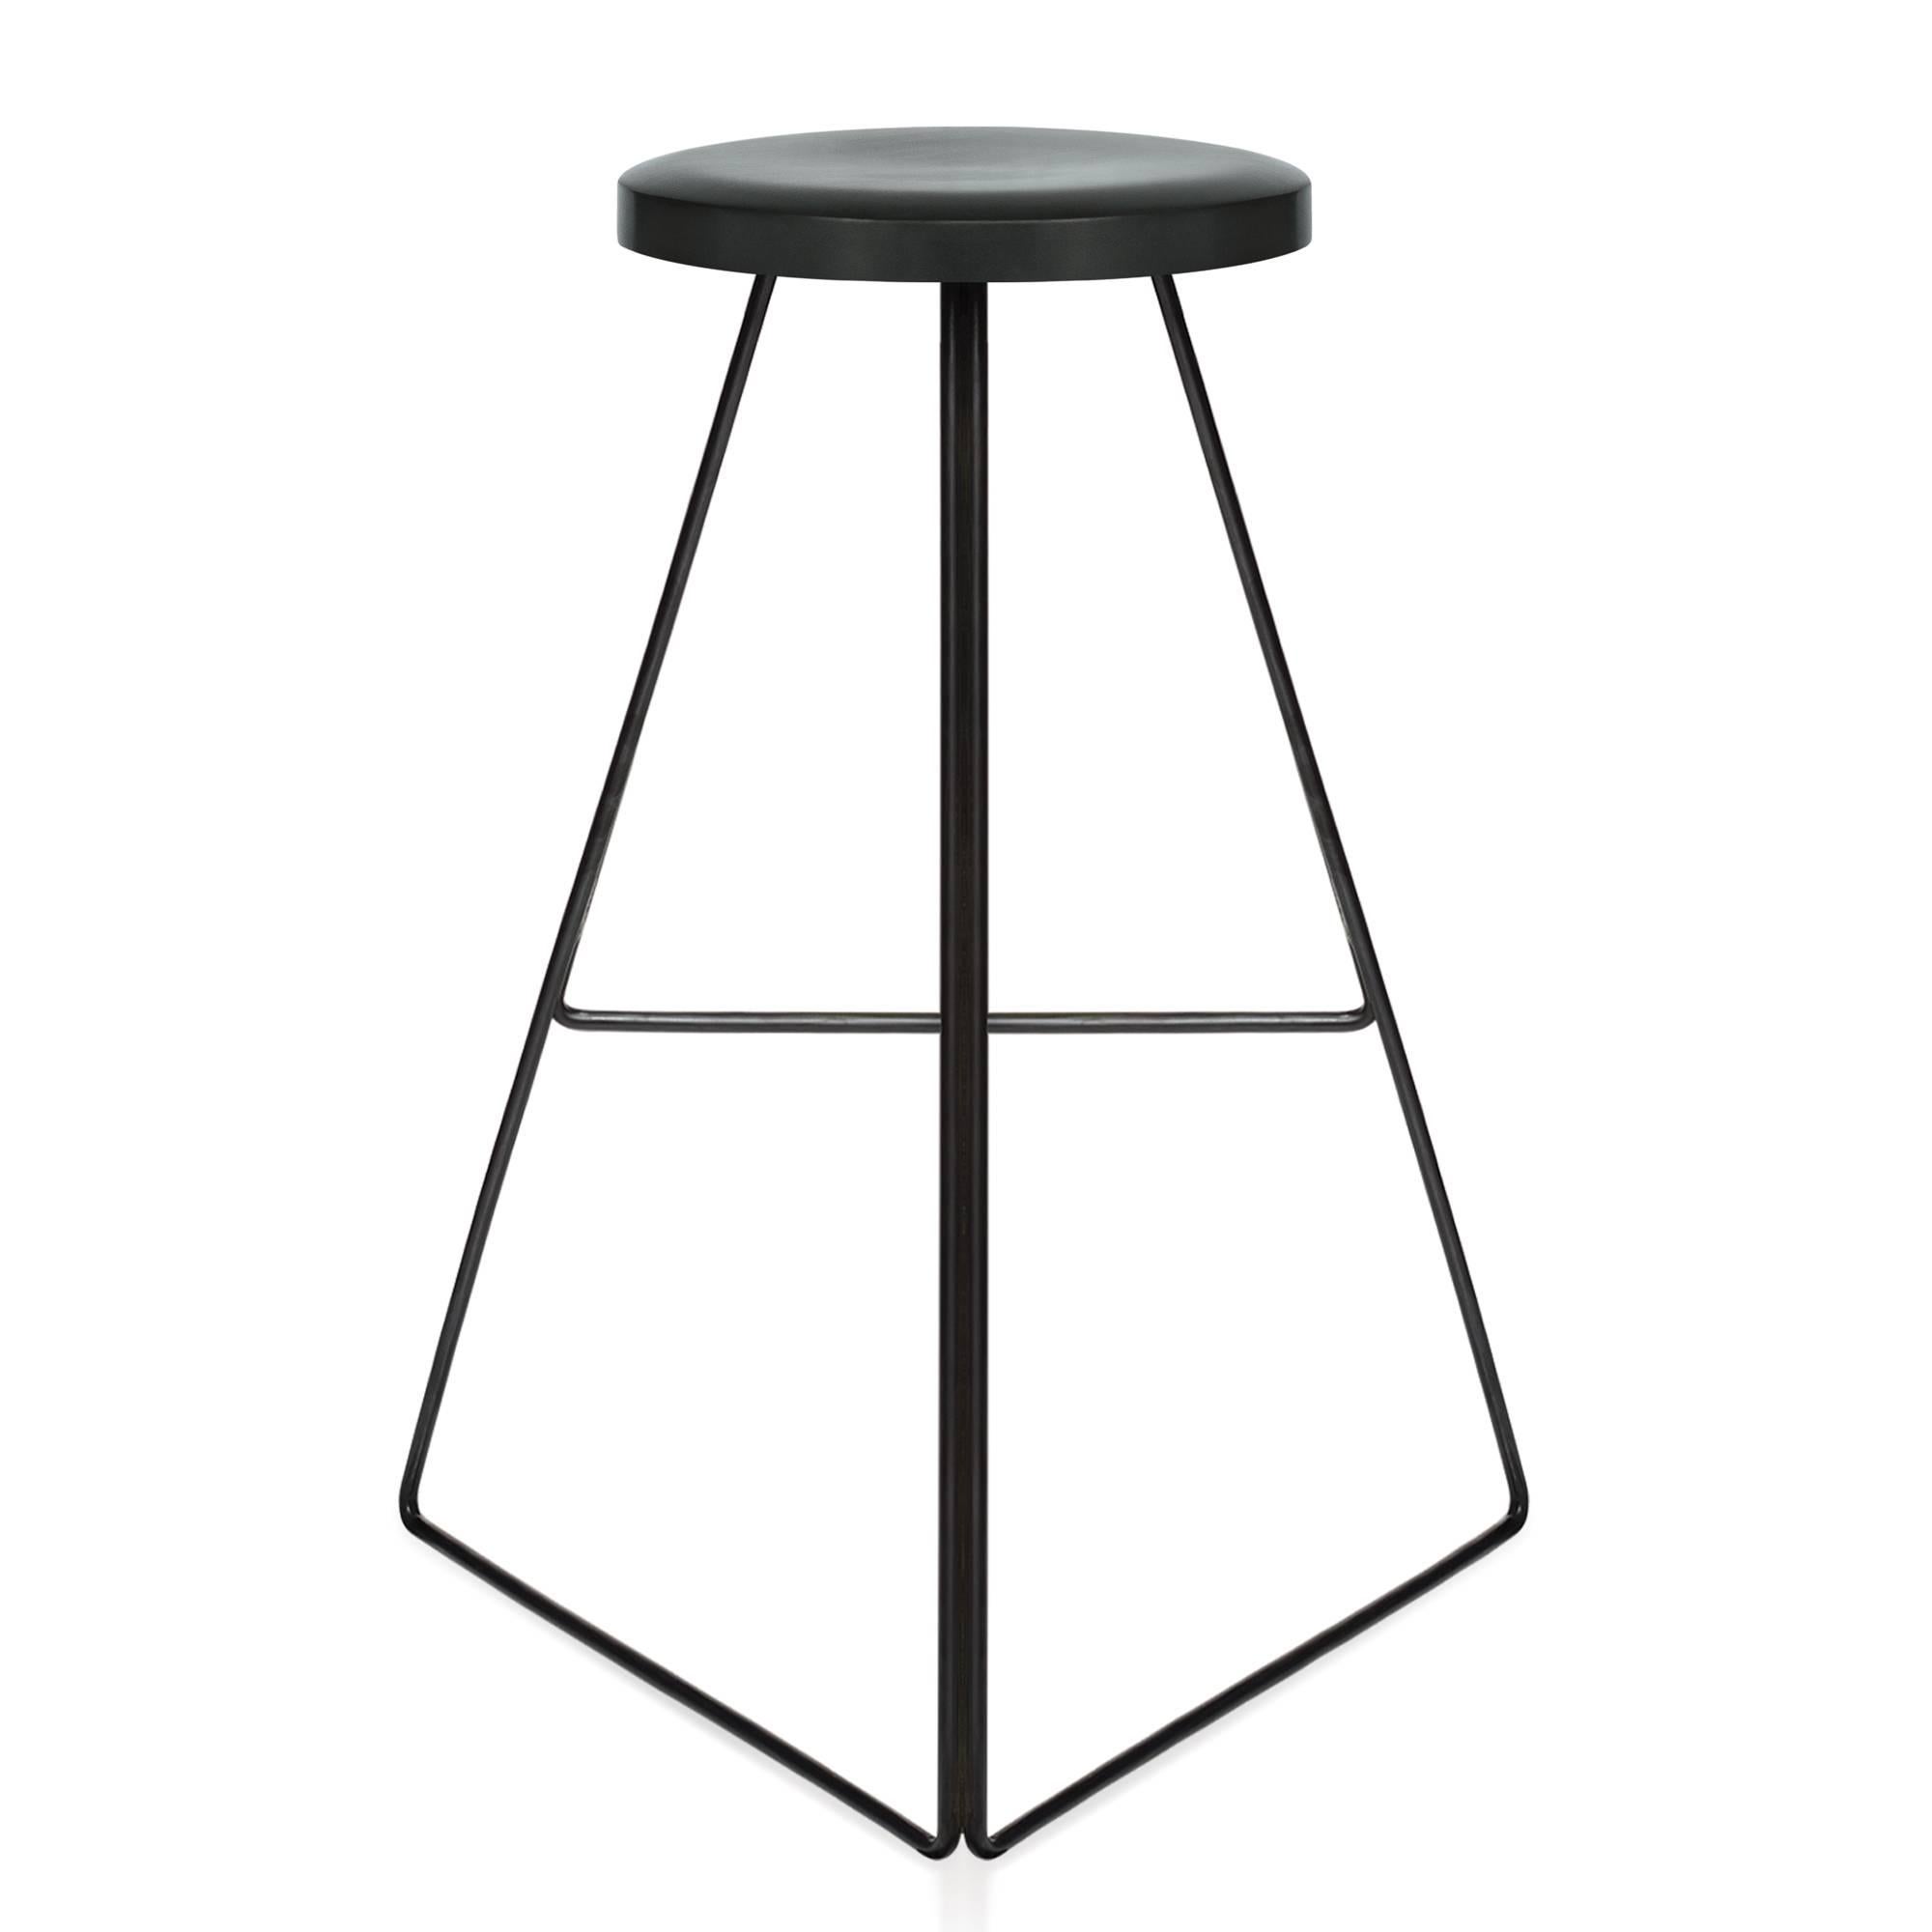 American Coleman Stool, Black and Charcoal, 54 Variations For Sale